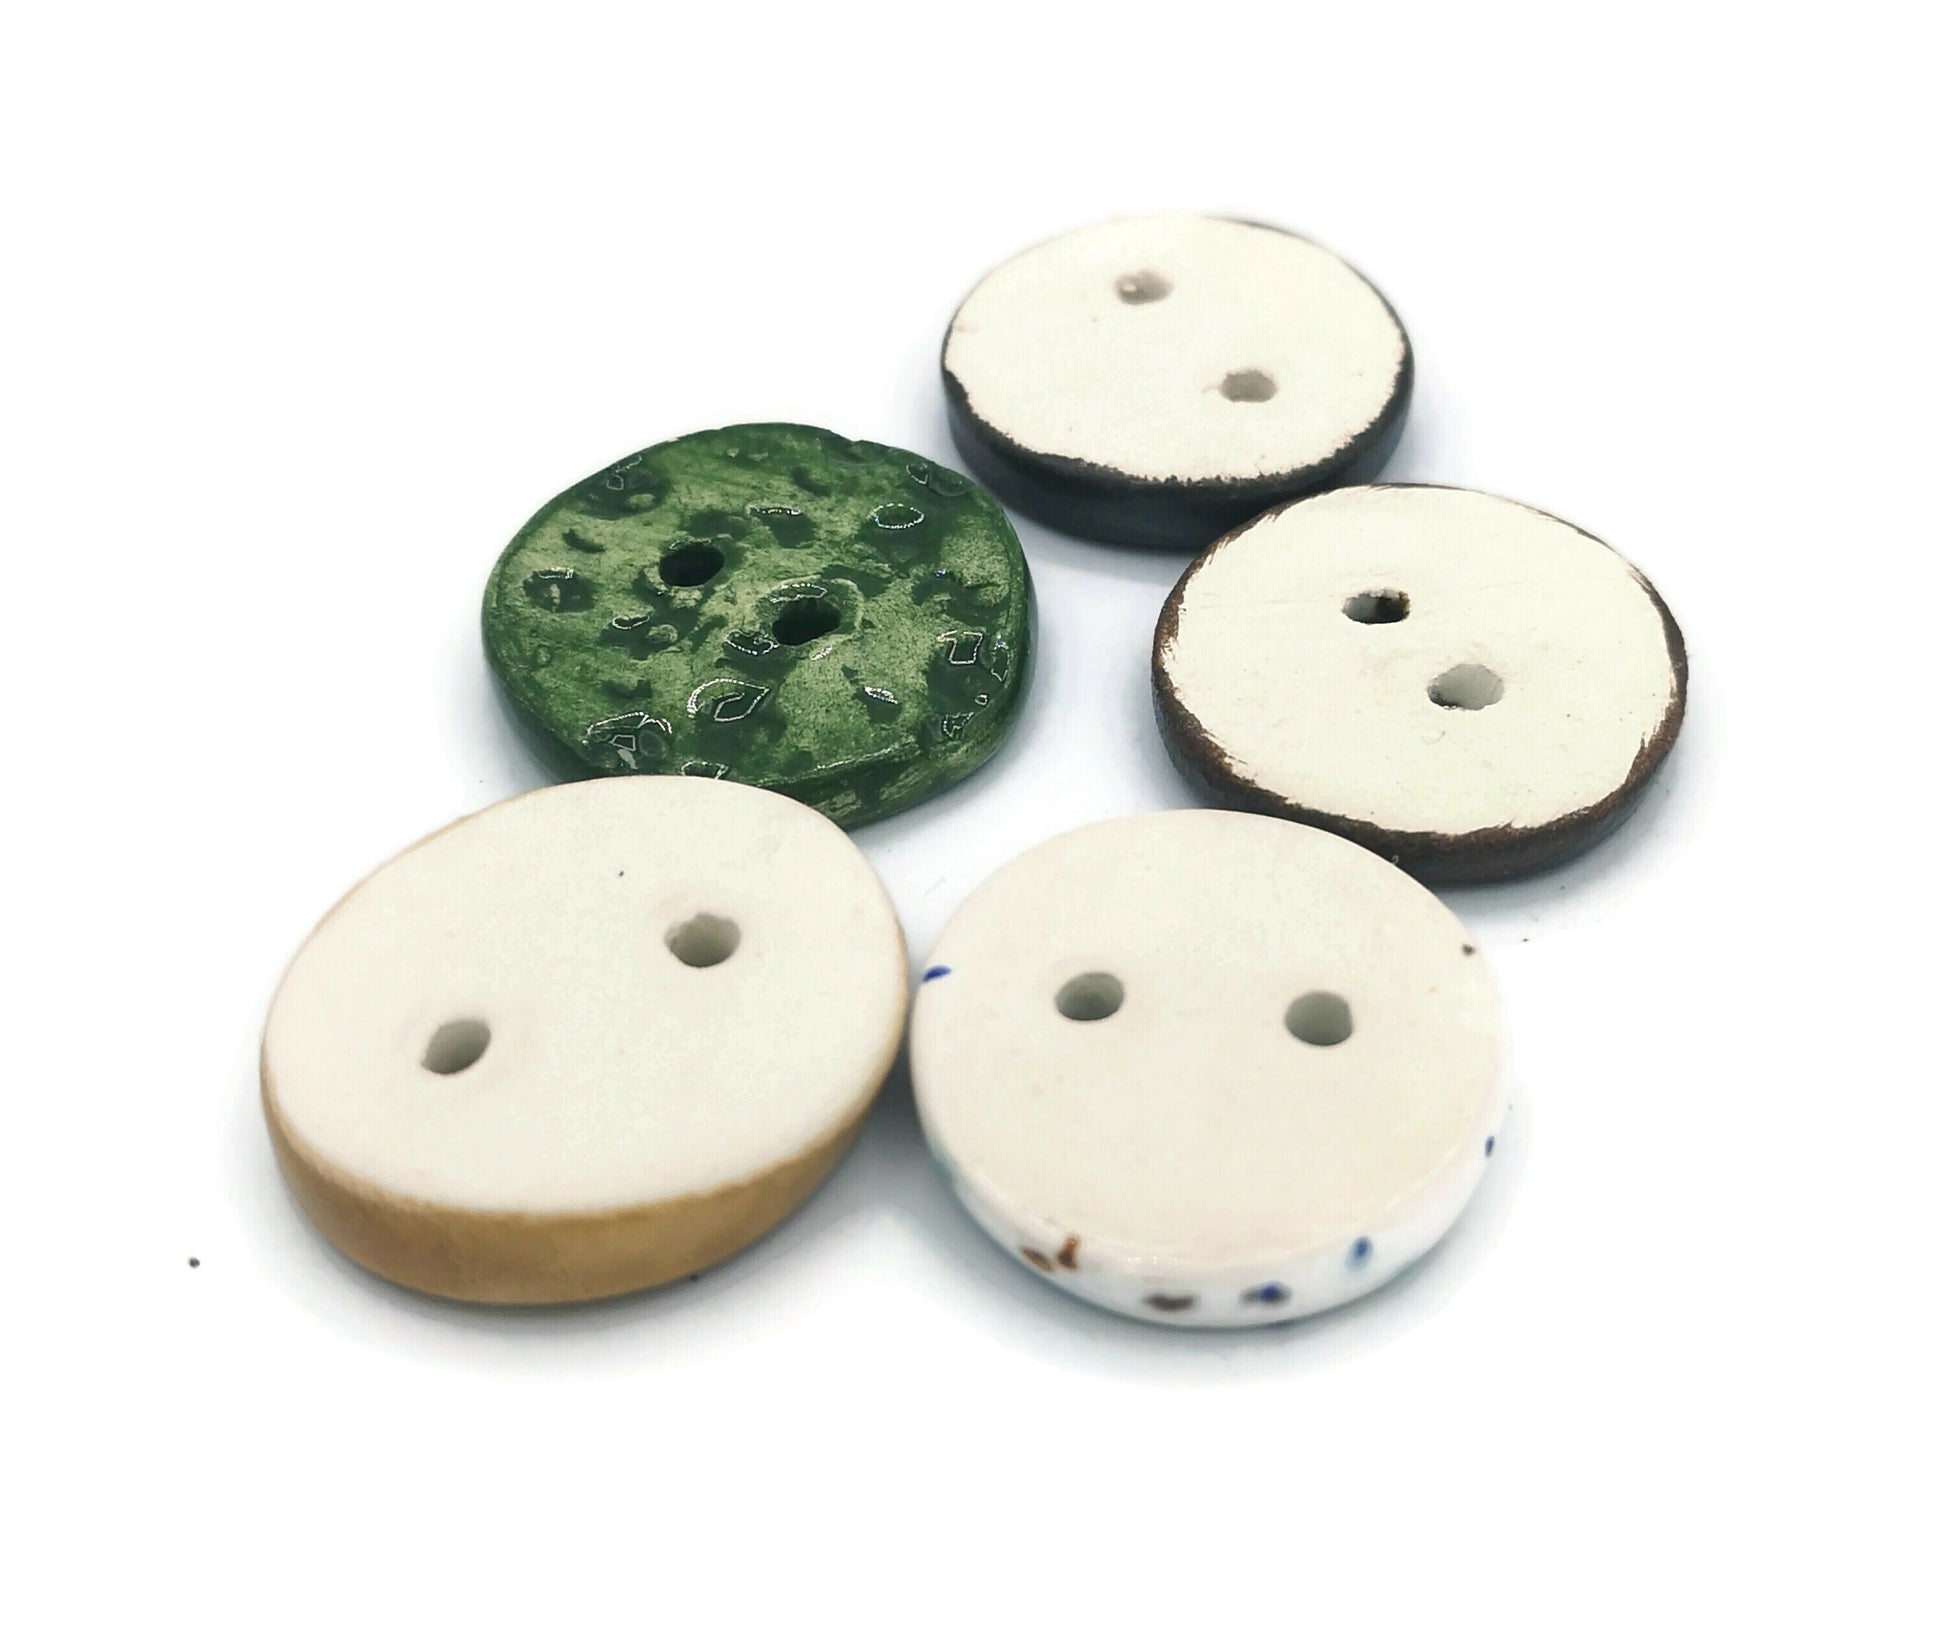 5Pc 30mm Handmade Ceramic Sewing Buttons For Crafts, Assorted Round Coat Buttons For Jewelry Making, Antique Look Sewing Supplies & Notions - Ceramica Ana Rafael